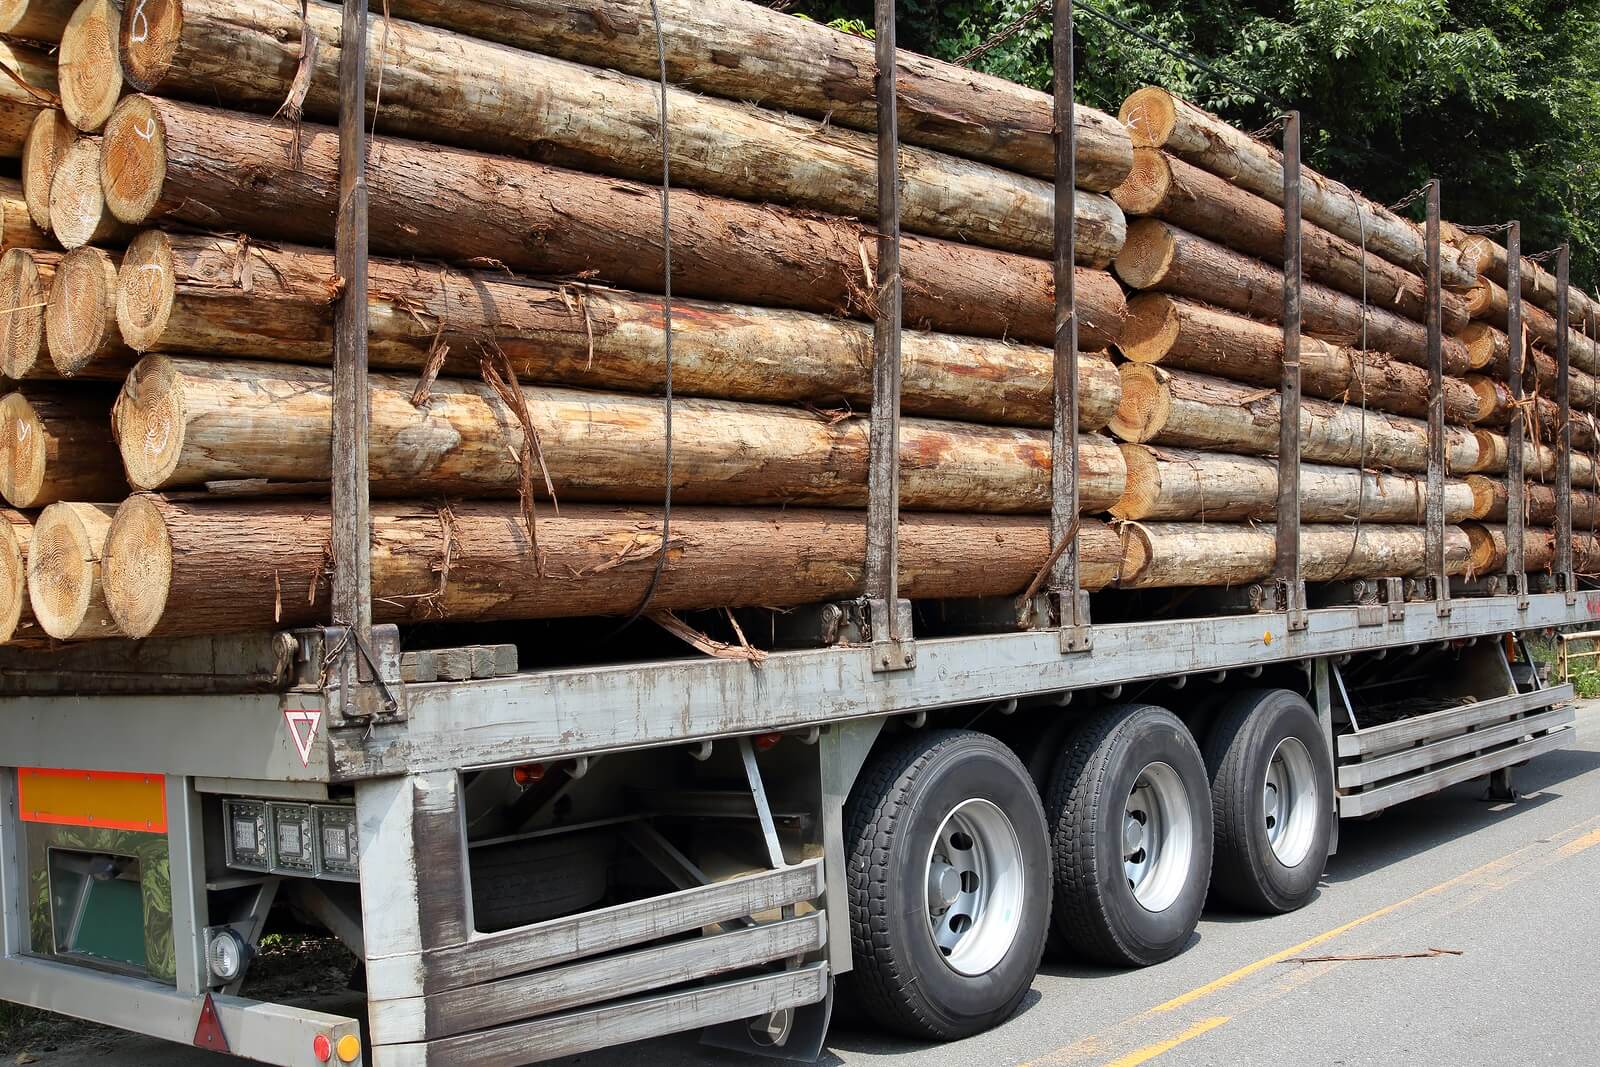 Timber trailer and stack of logs at a forest logging site